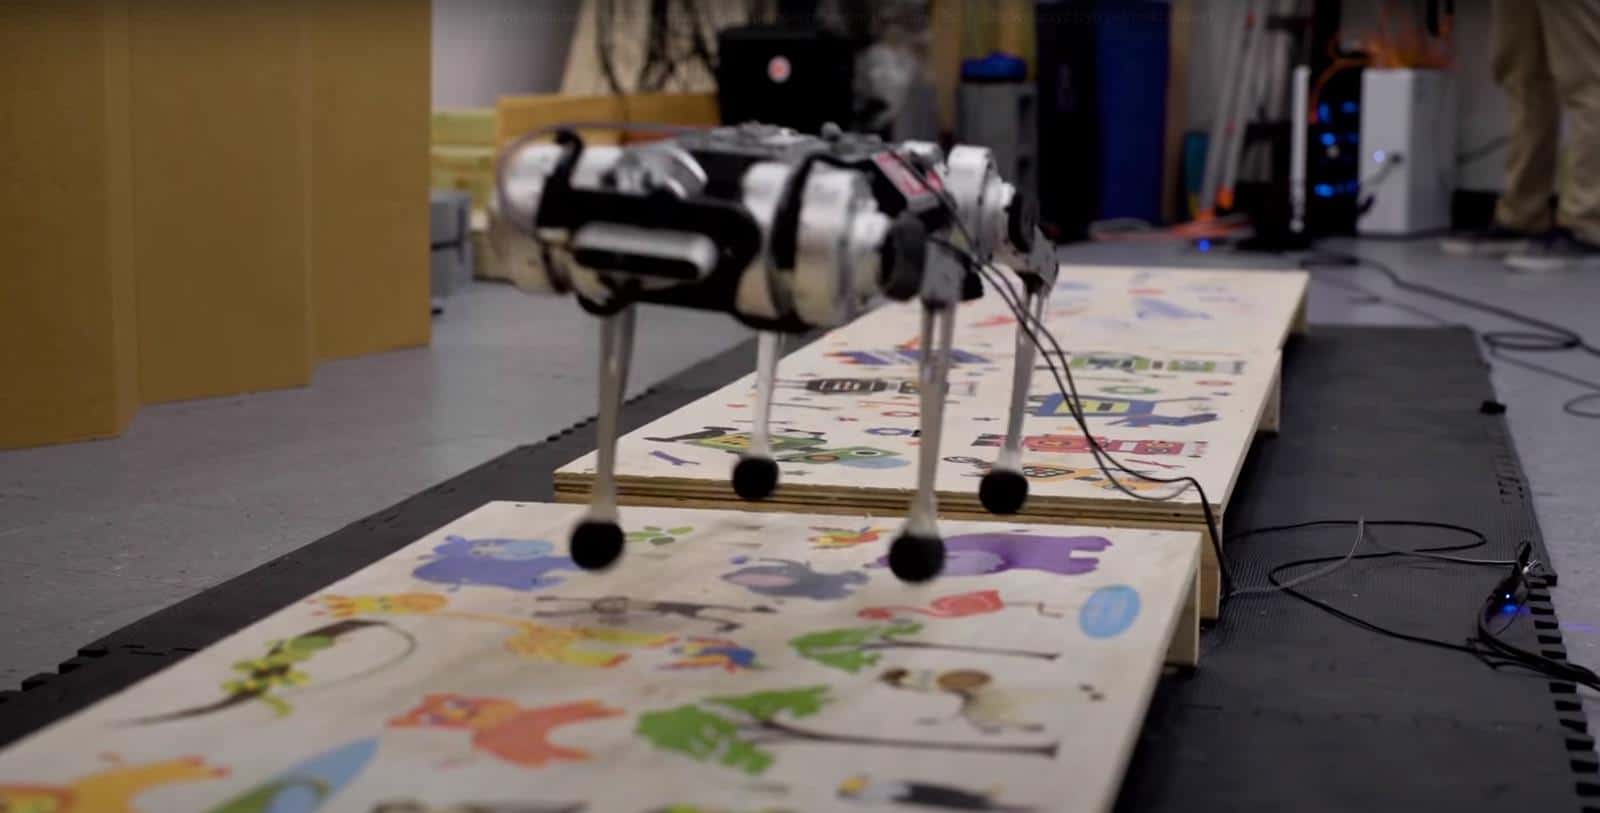 Have a look at the jumping four-legged robot from MIT